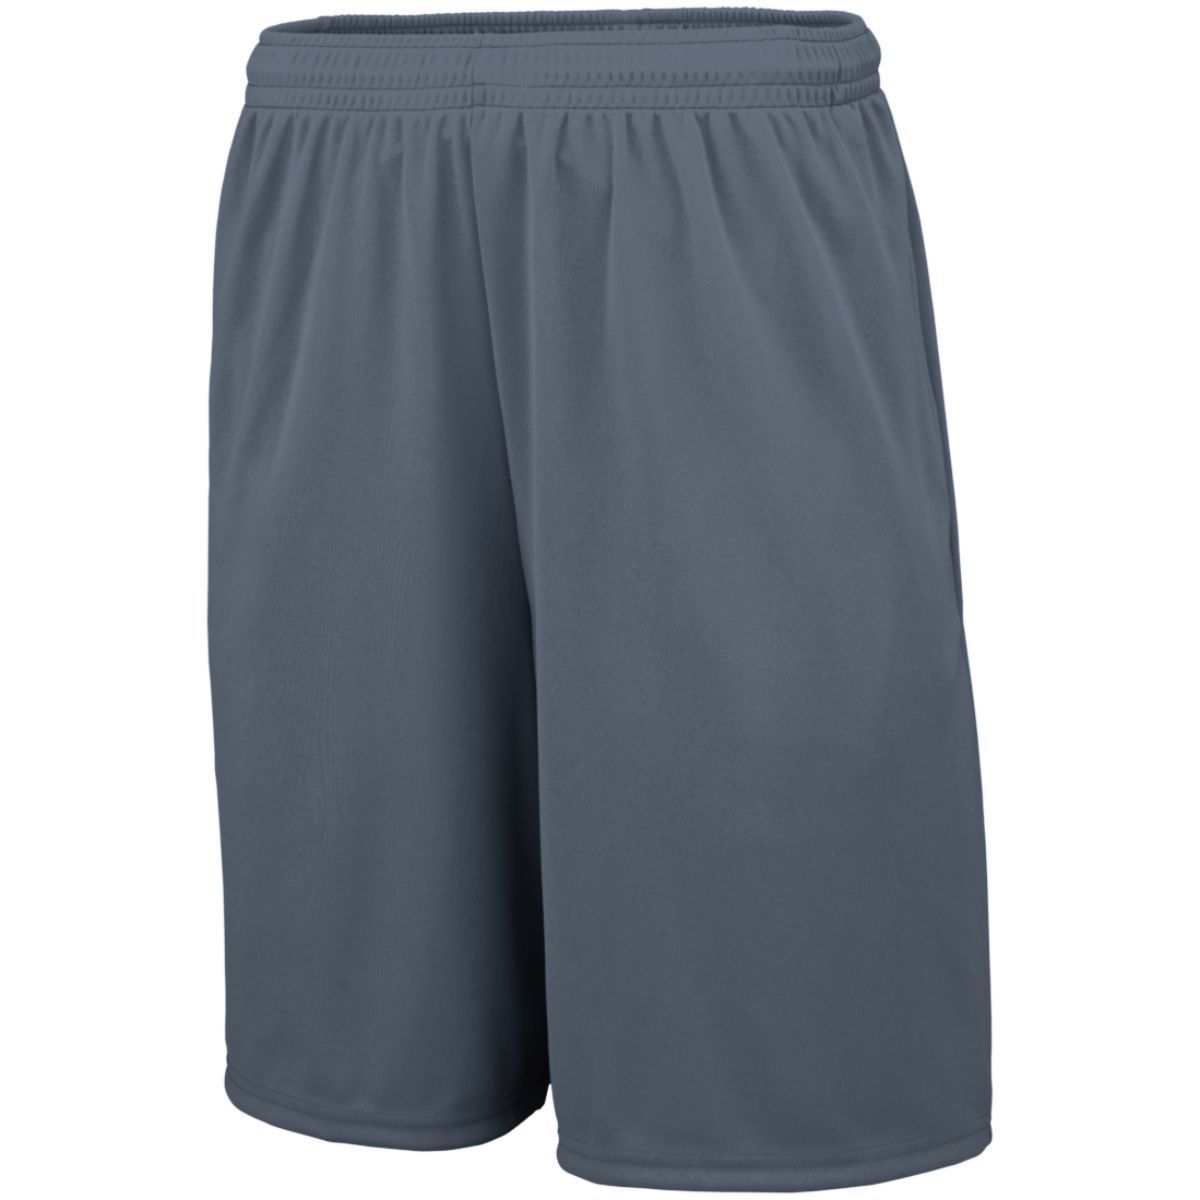 Augusta Sportswear Training Shorts With Pockets in Graphite  -Part of the Adult, Adult-Shorts, Augusta-Products, Lacrosse, All-Sports, All-Sports-1 product lines at KanaleyCreations.com